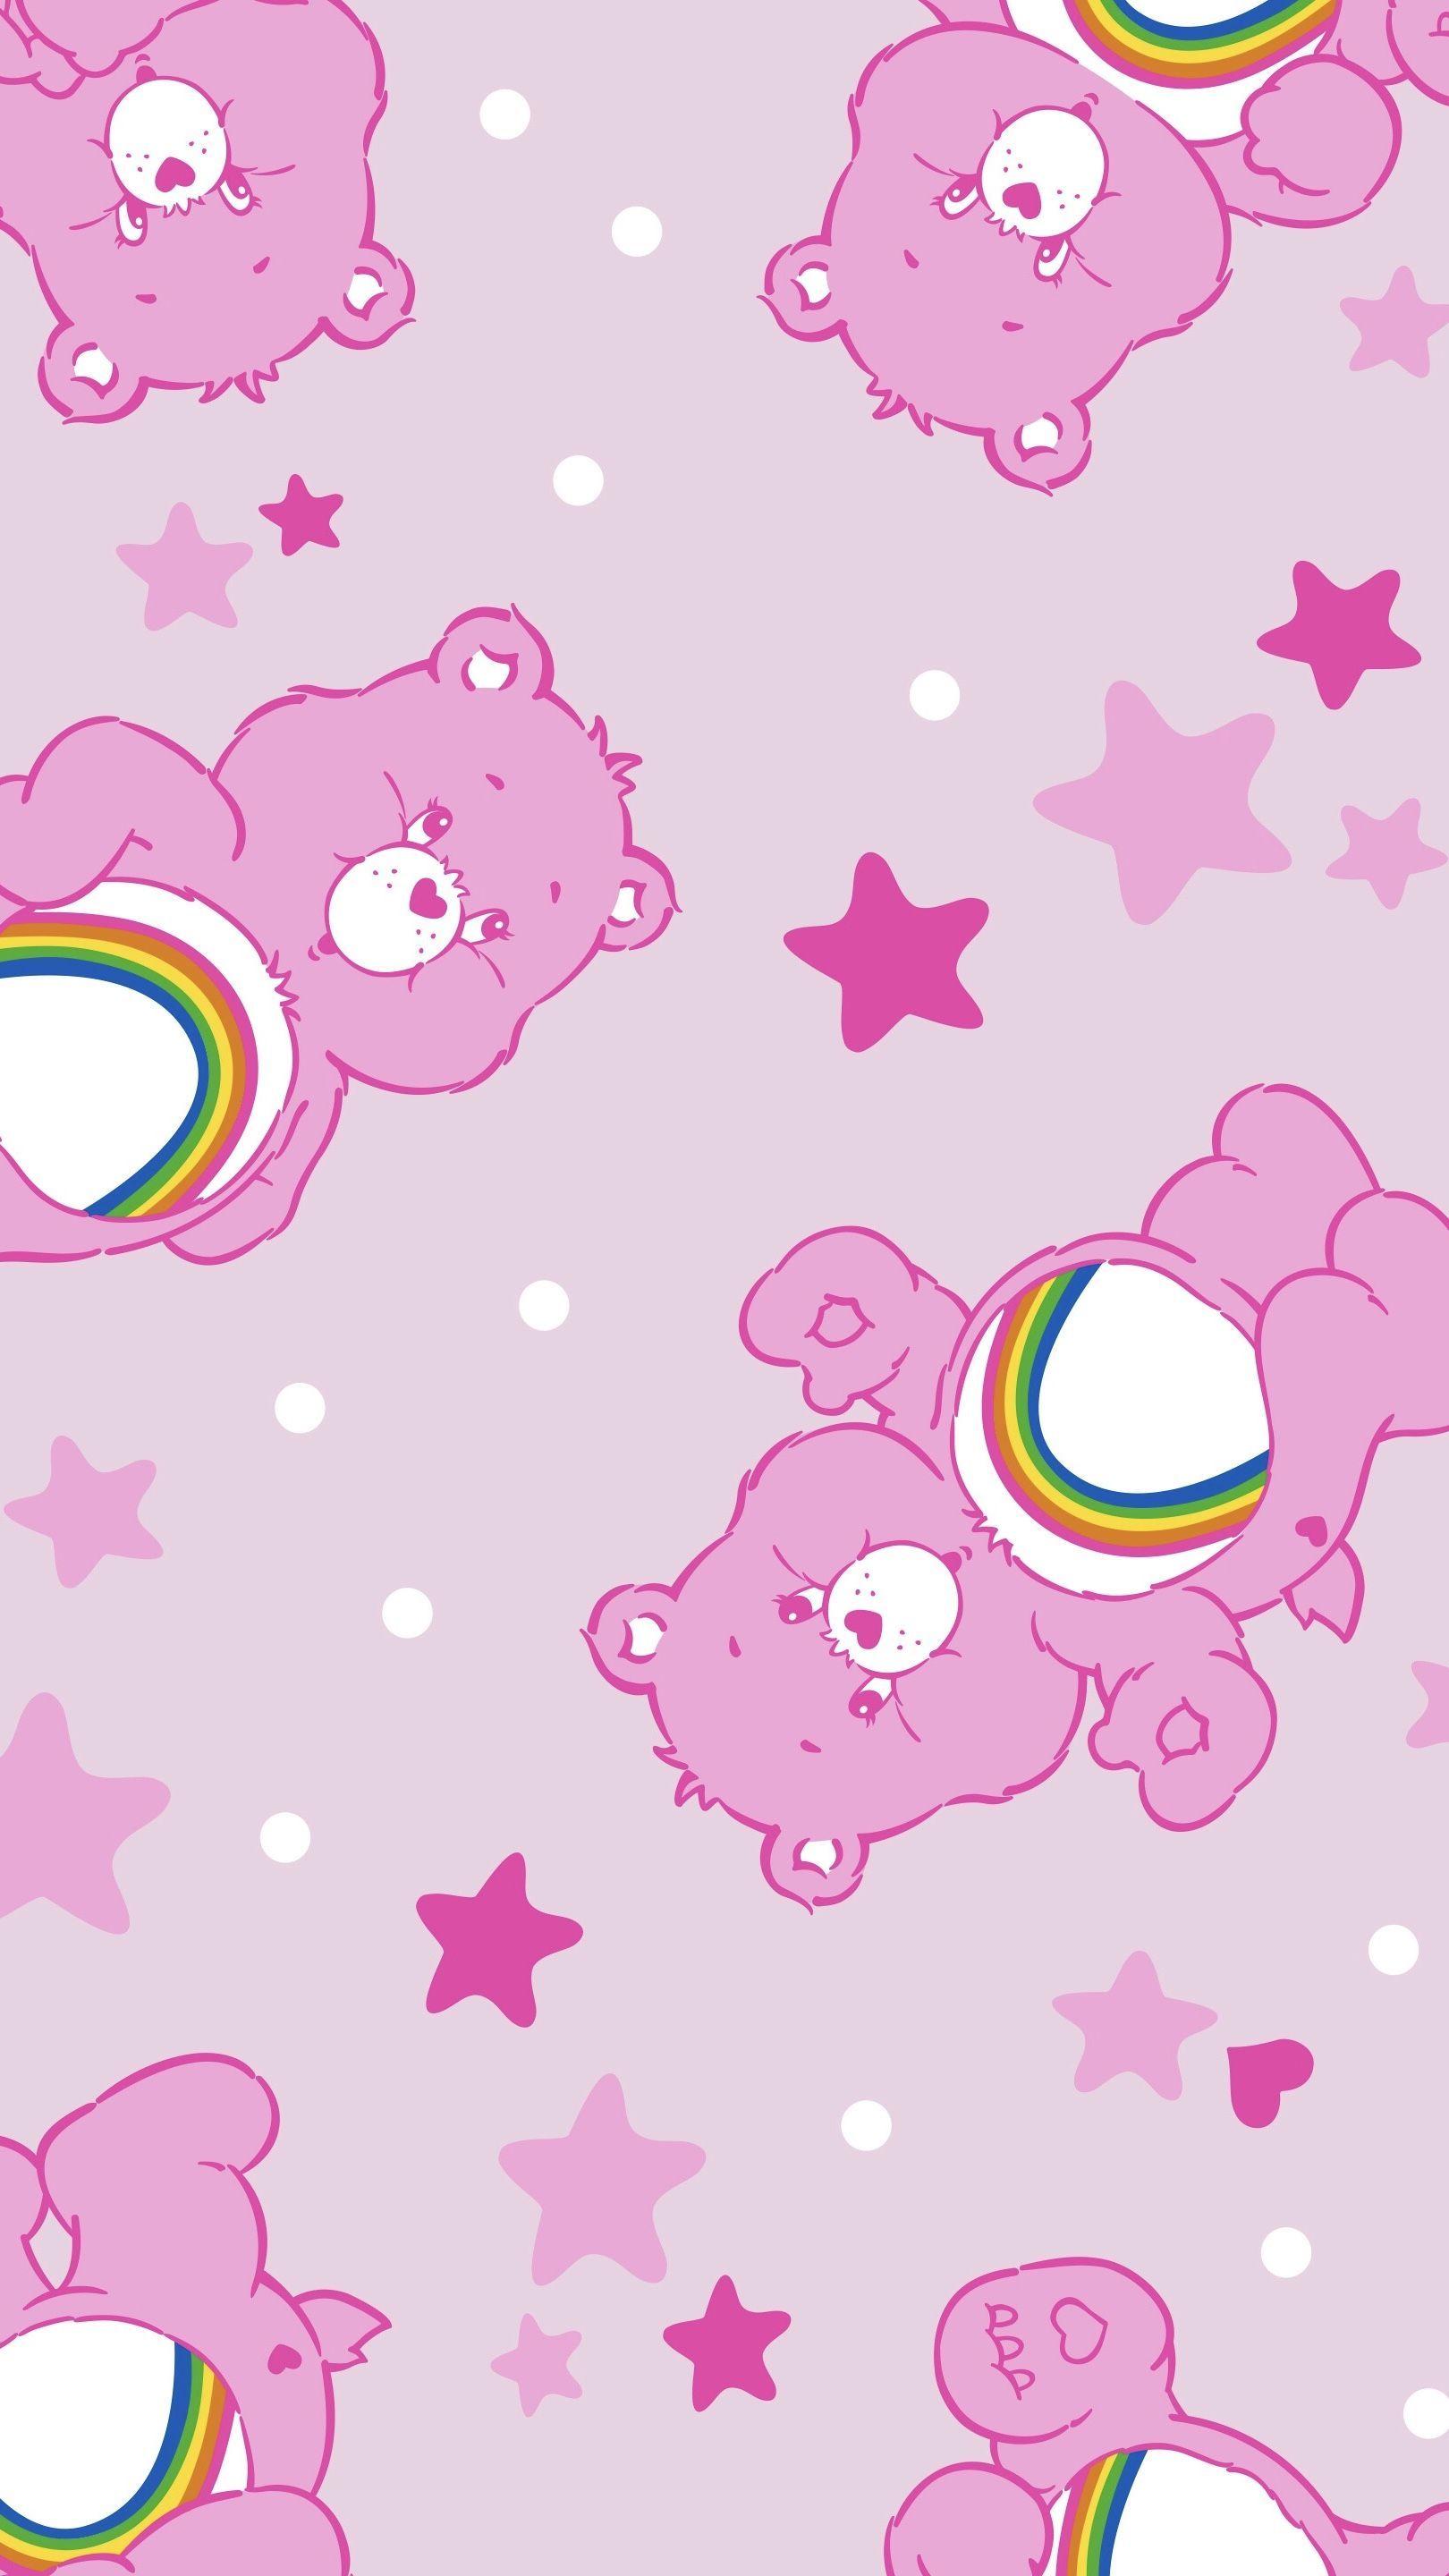 Funny Care Bear Images Download